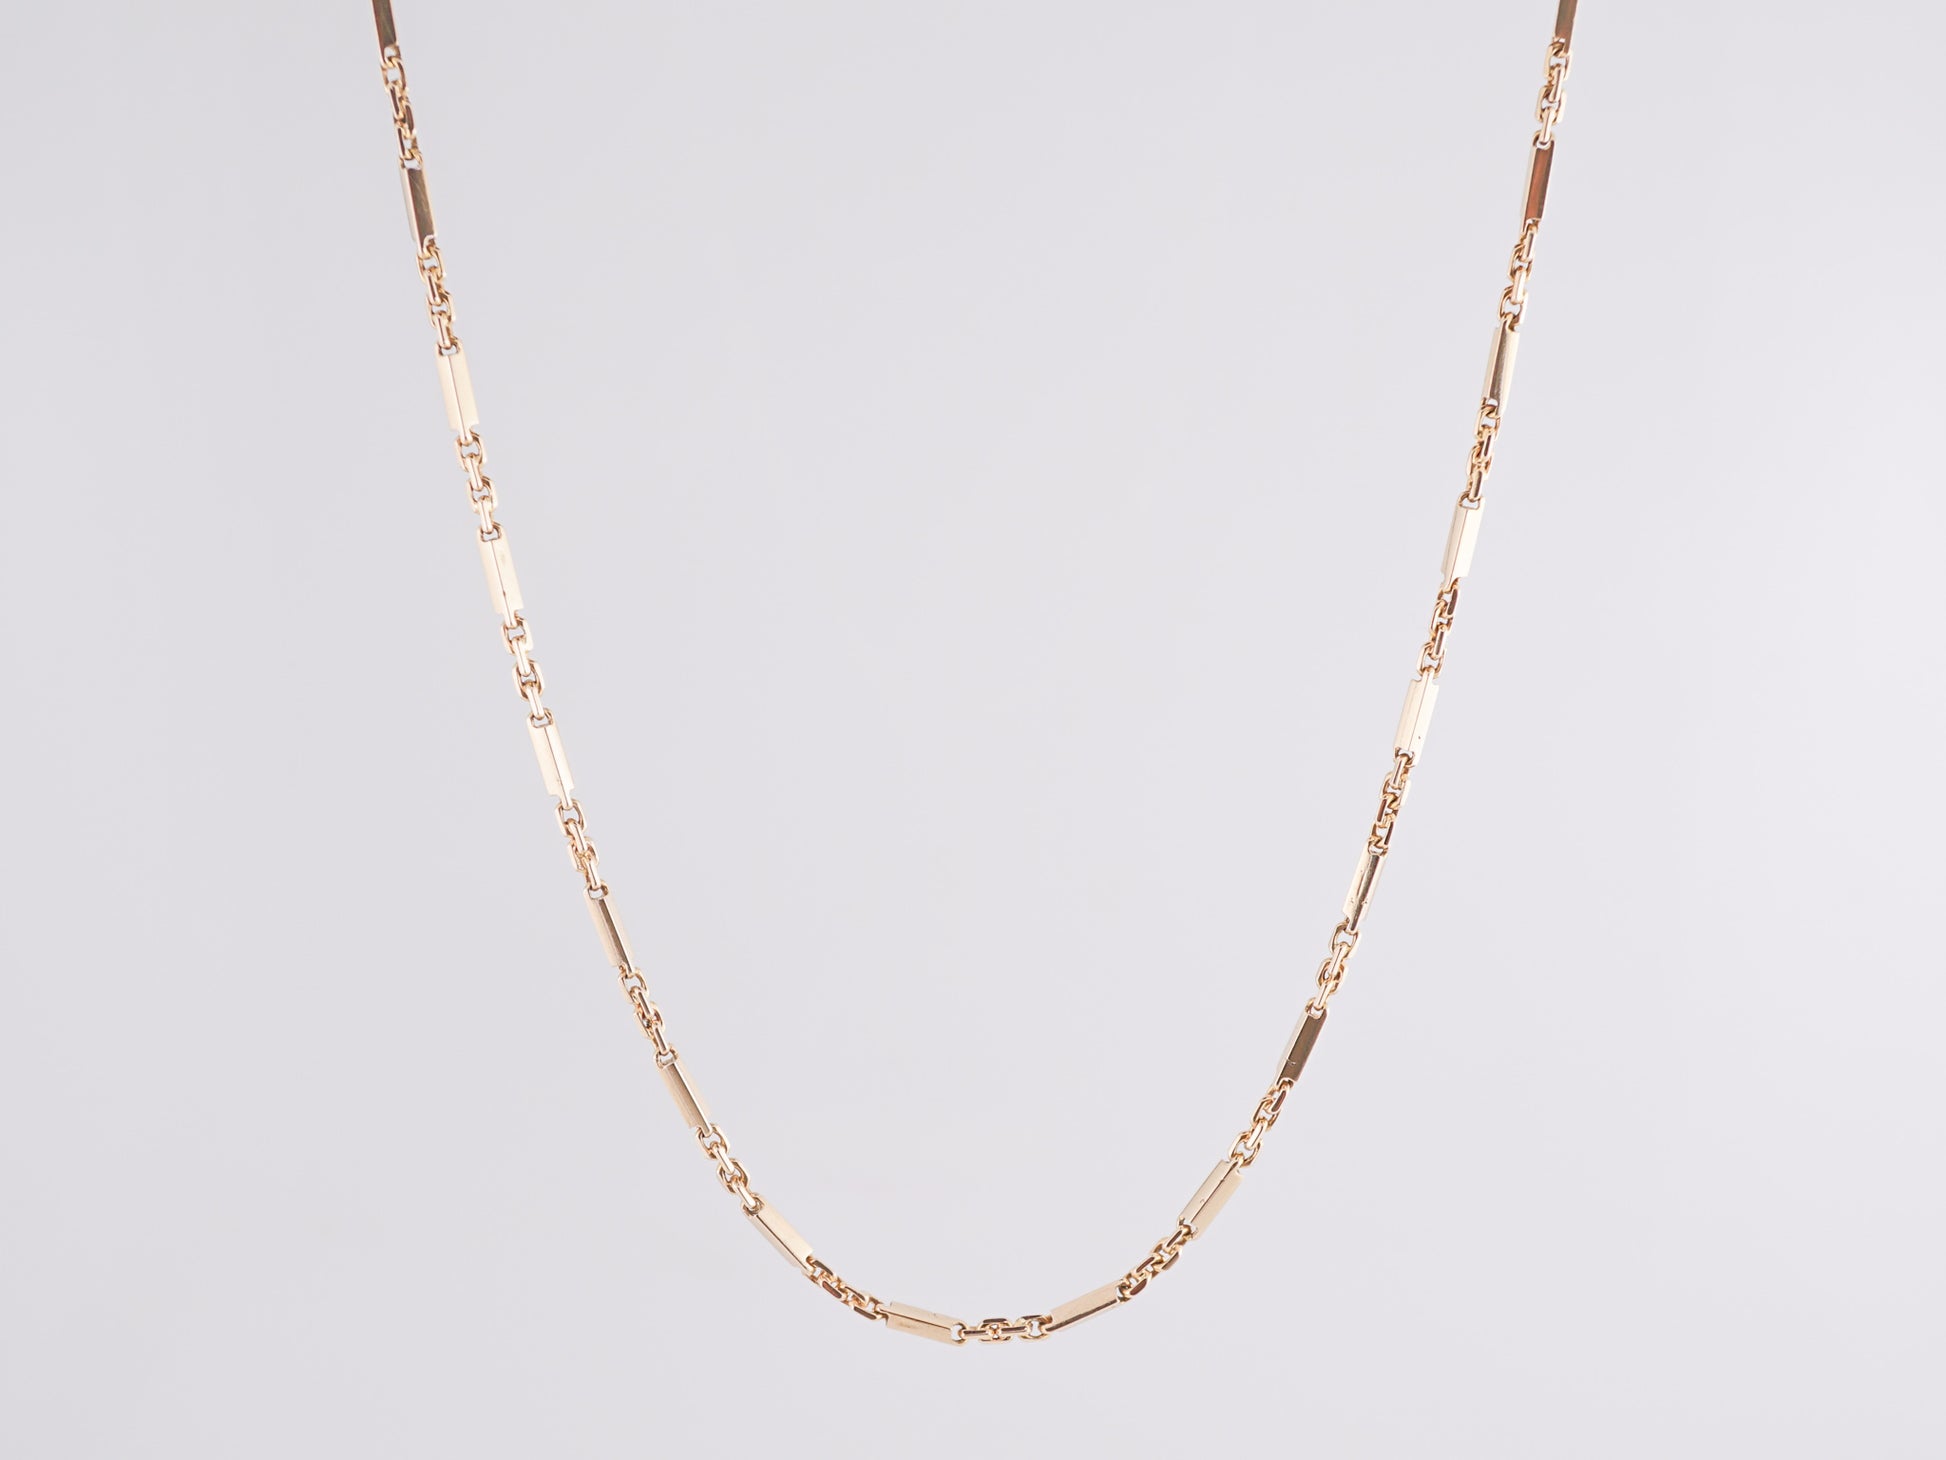 21 Inch Necklace in 18k Yellow Gold